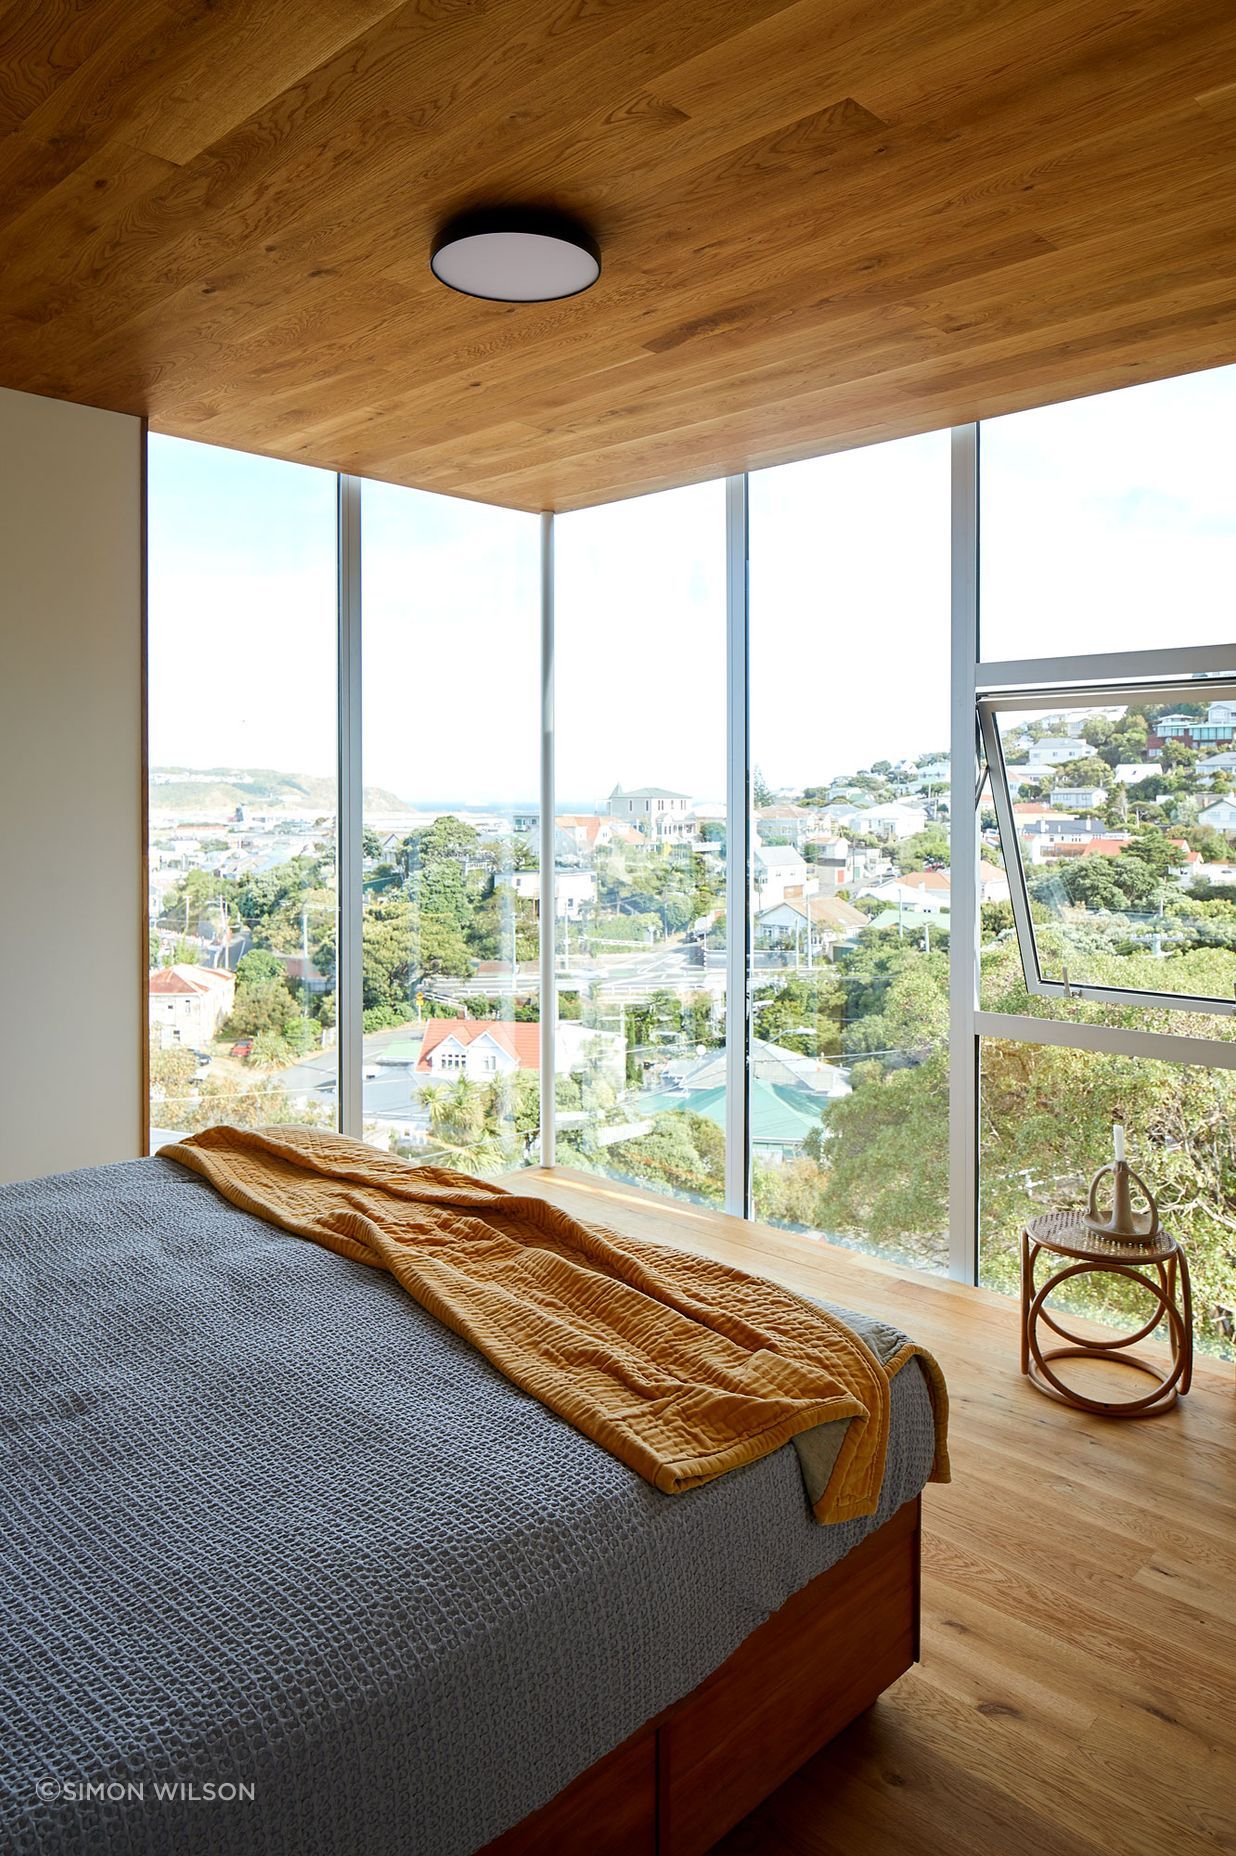 The guest bedroom, the only part of the house with vertiginous views. Elsewhere you don’t feel like you’re on an edge, says Sally Ogle of Patchwork Architecture.